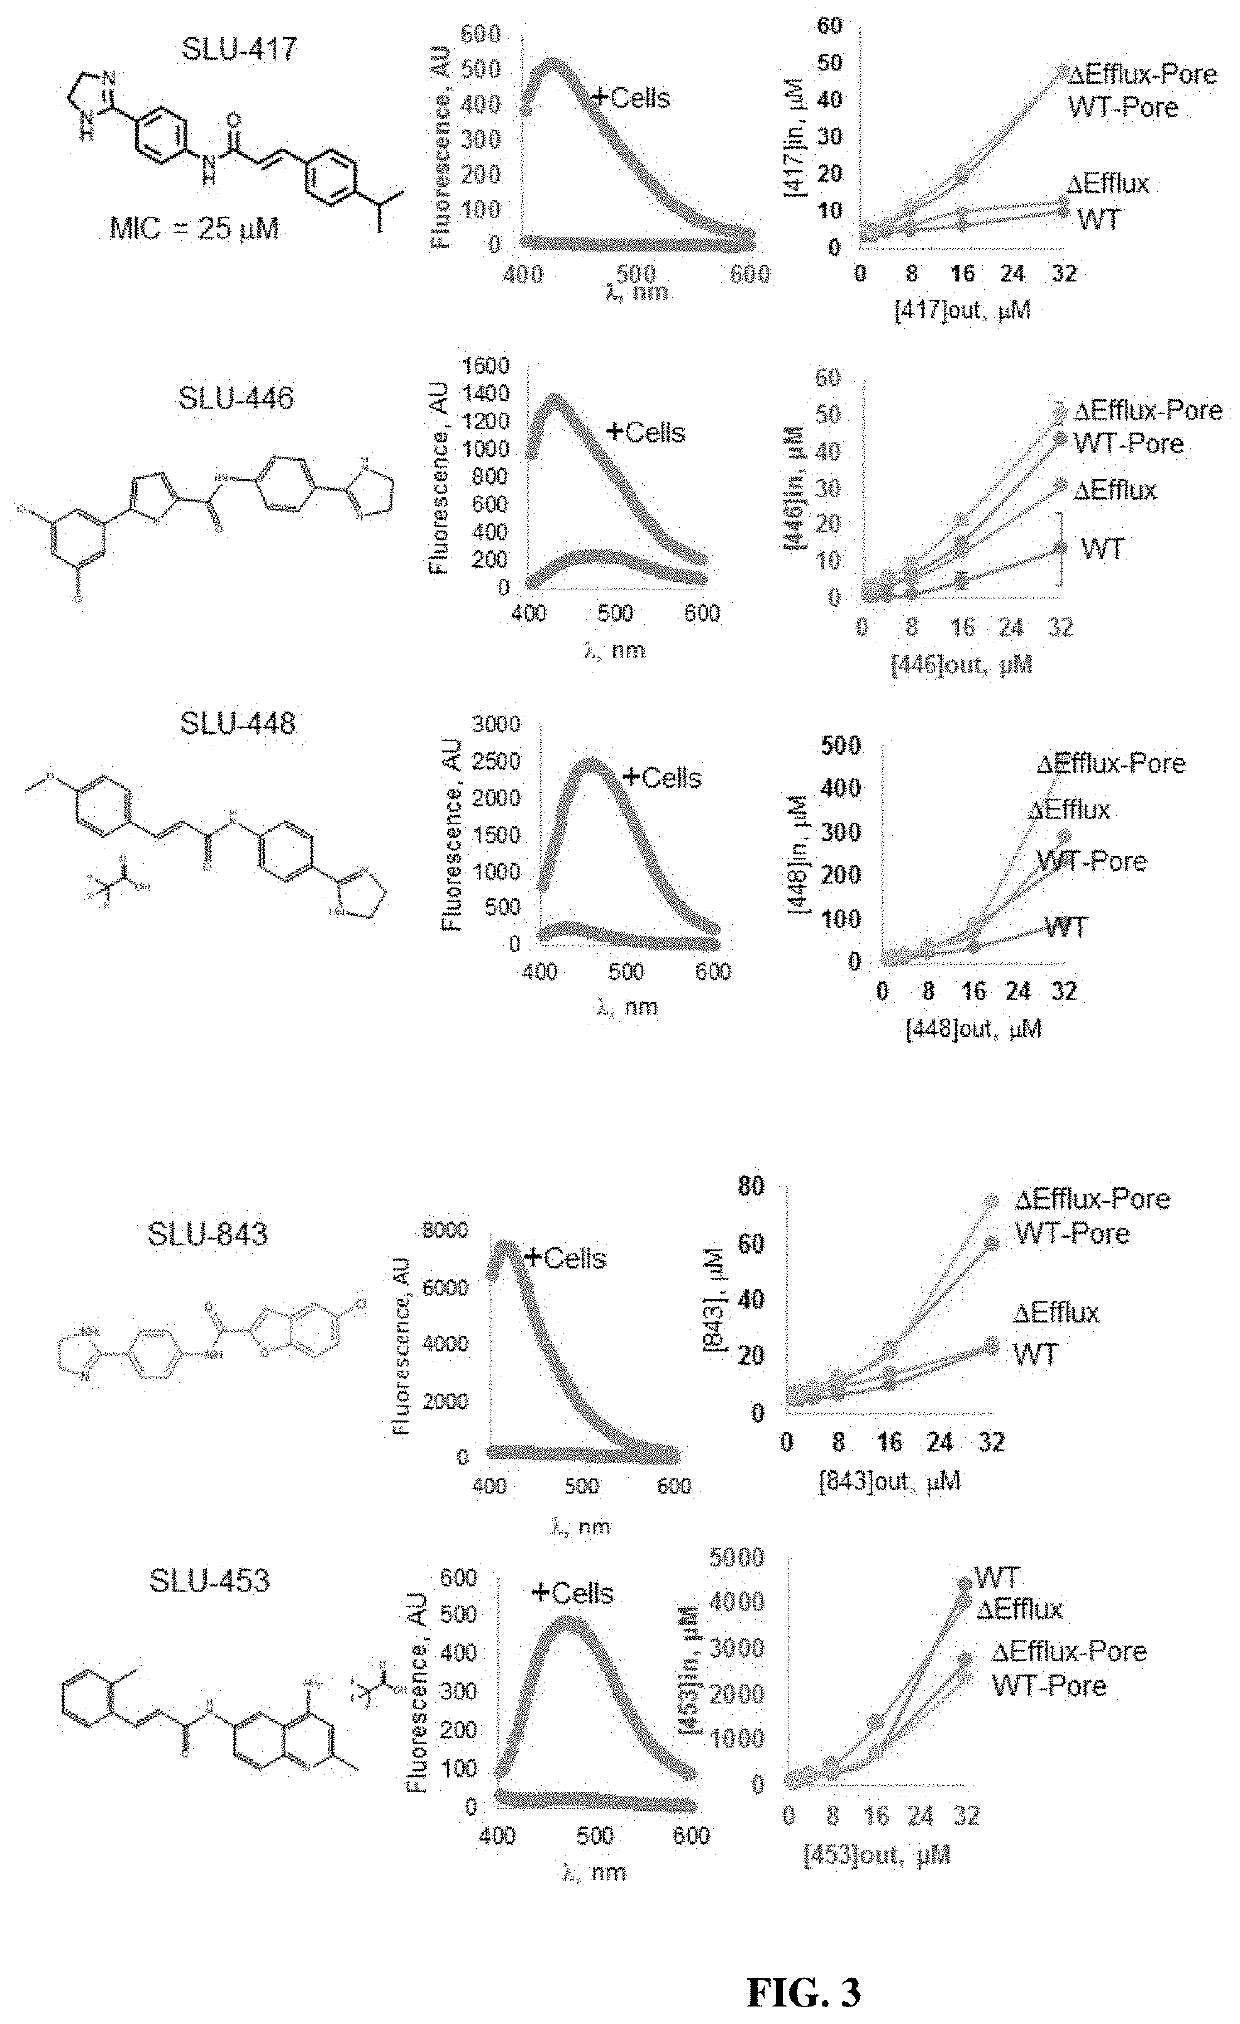 Fluorescent probes for drug permeability in gram negative bacteria